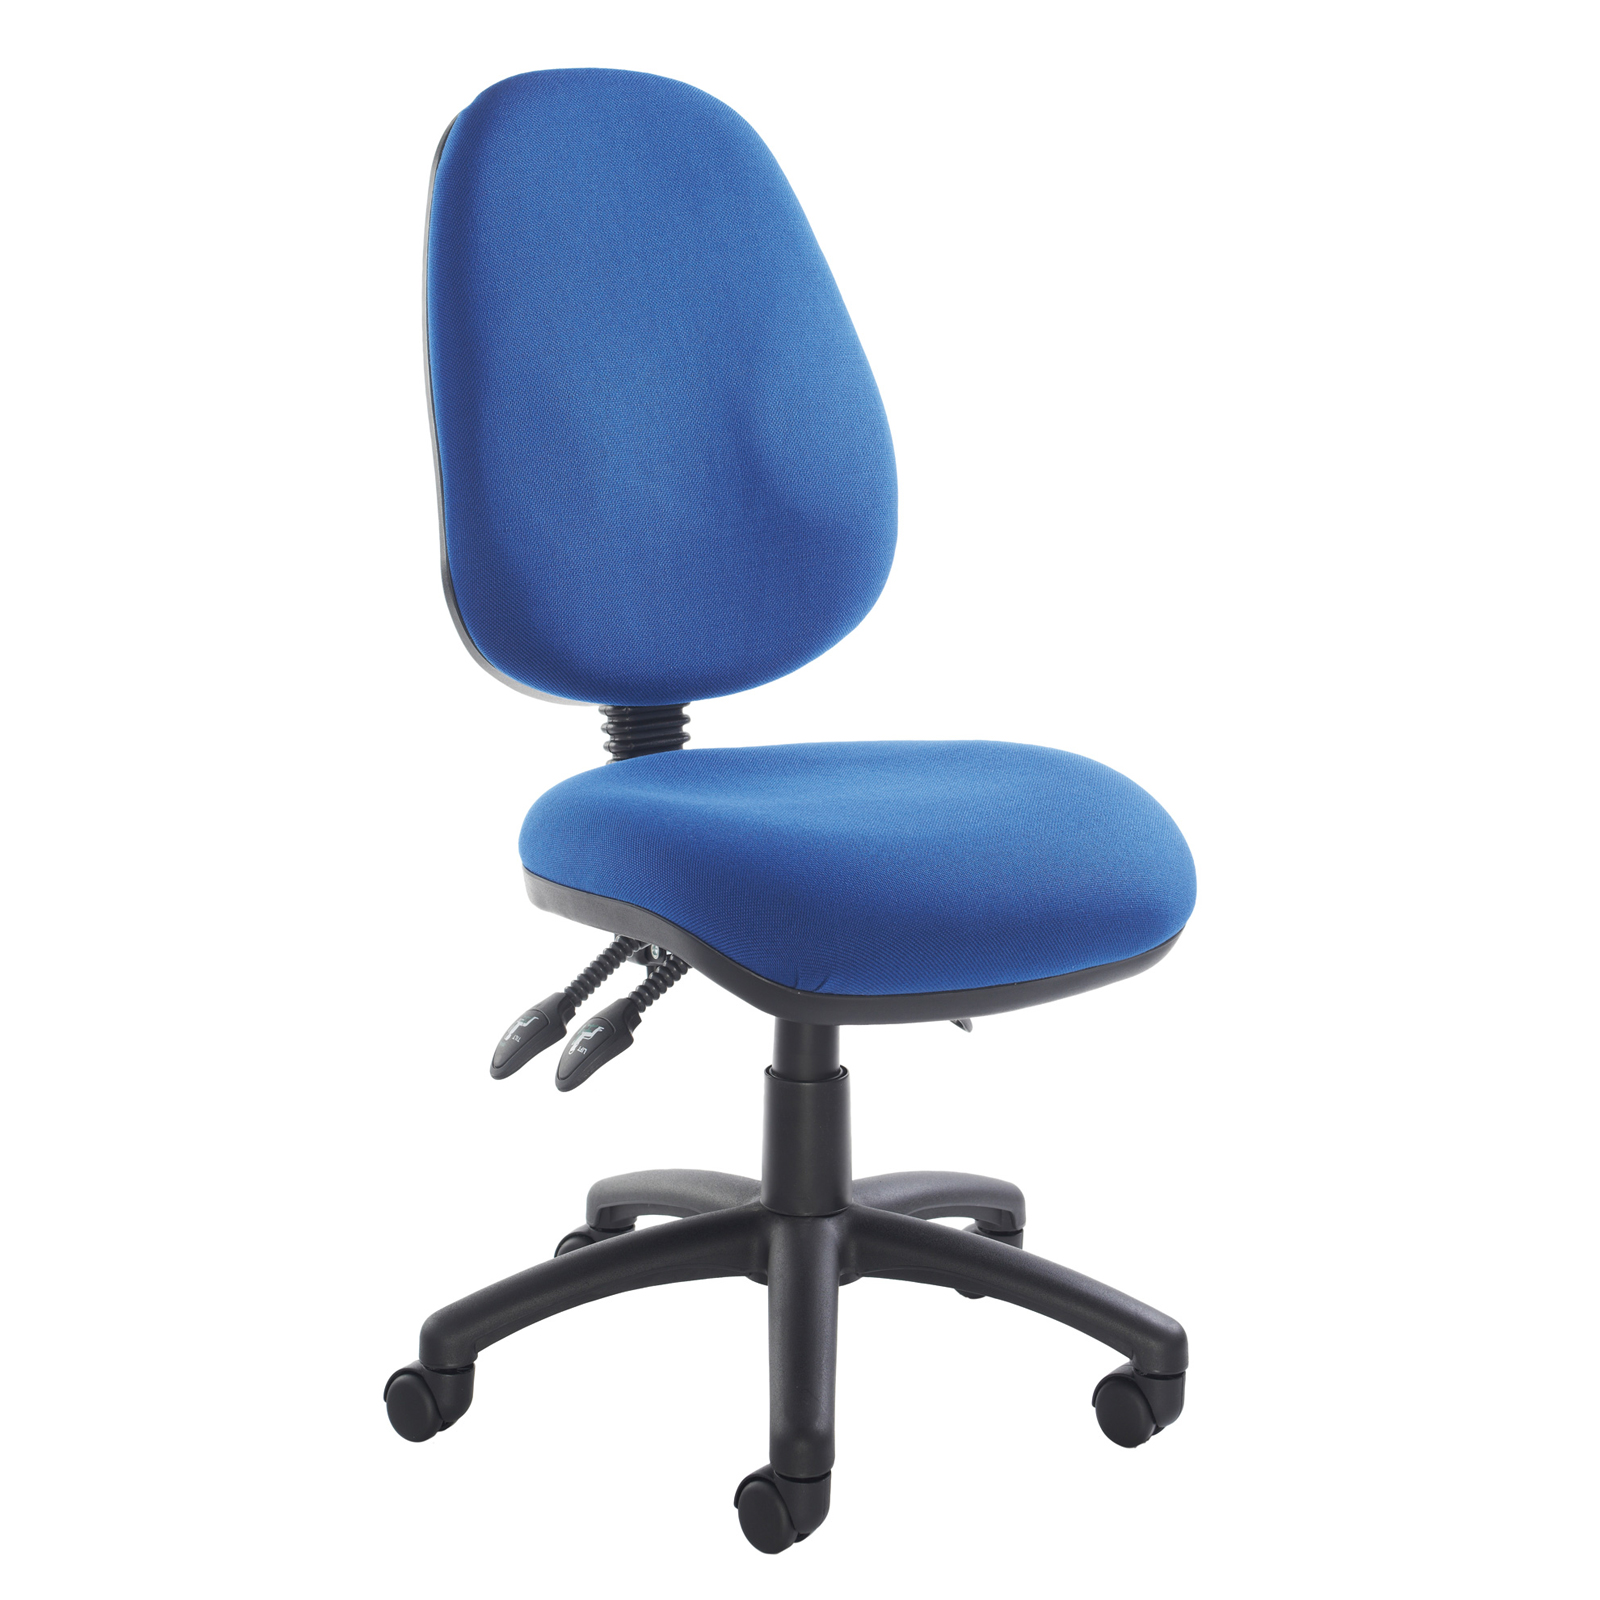 Vantage 200 3 lever asynchro operators chair with no arms - blue